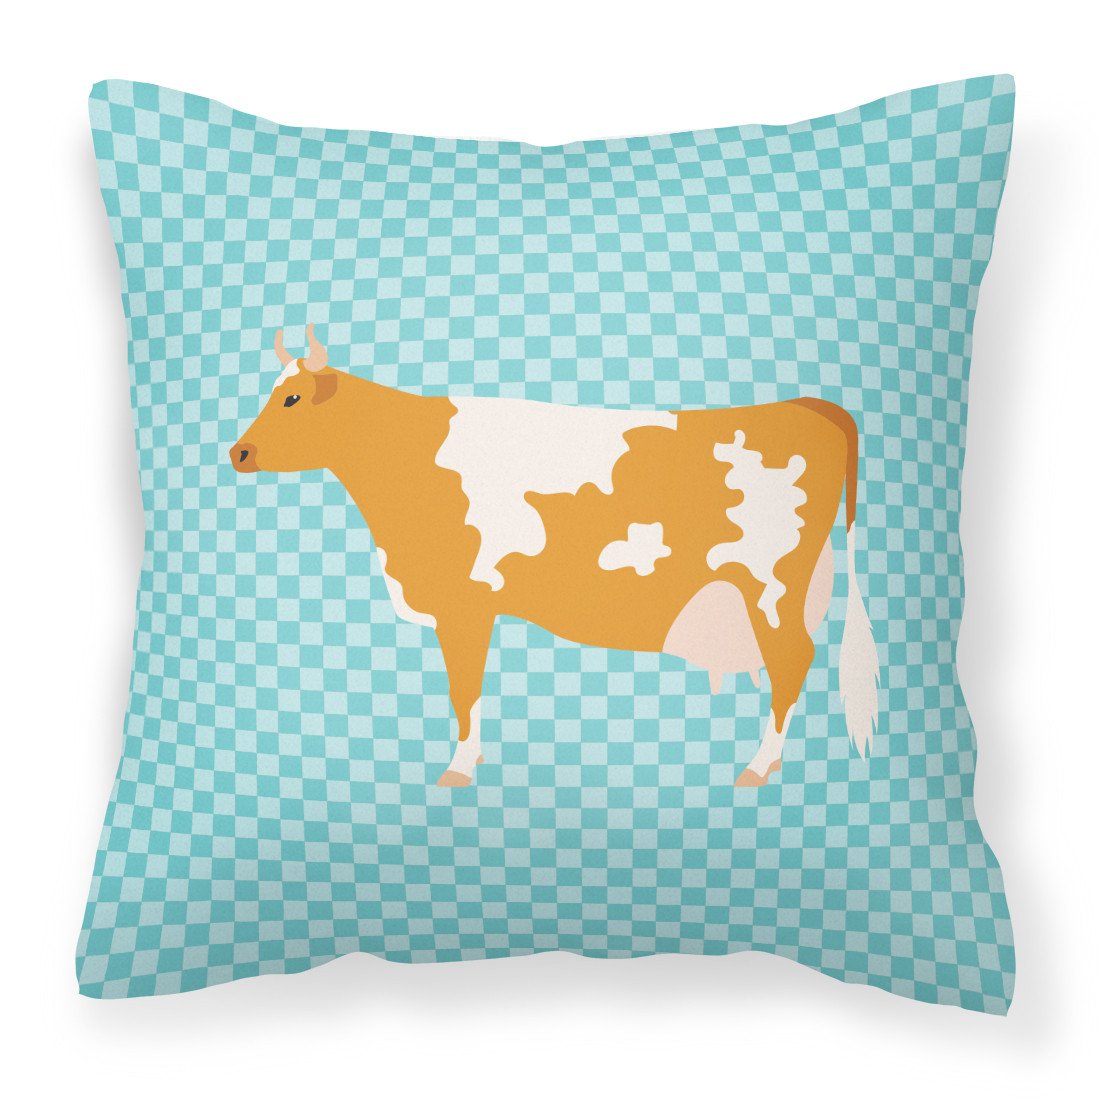 Guernsey Cow Blue Check Fabric Decorative Pillow BB7995PW1818 by Caroline's Treasures